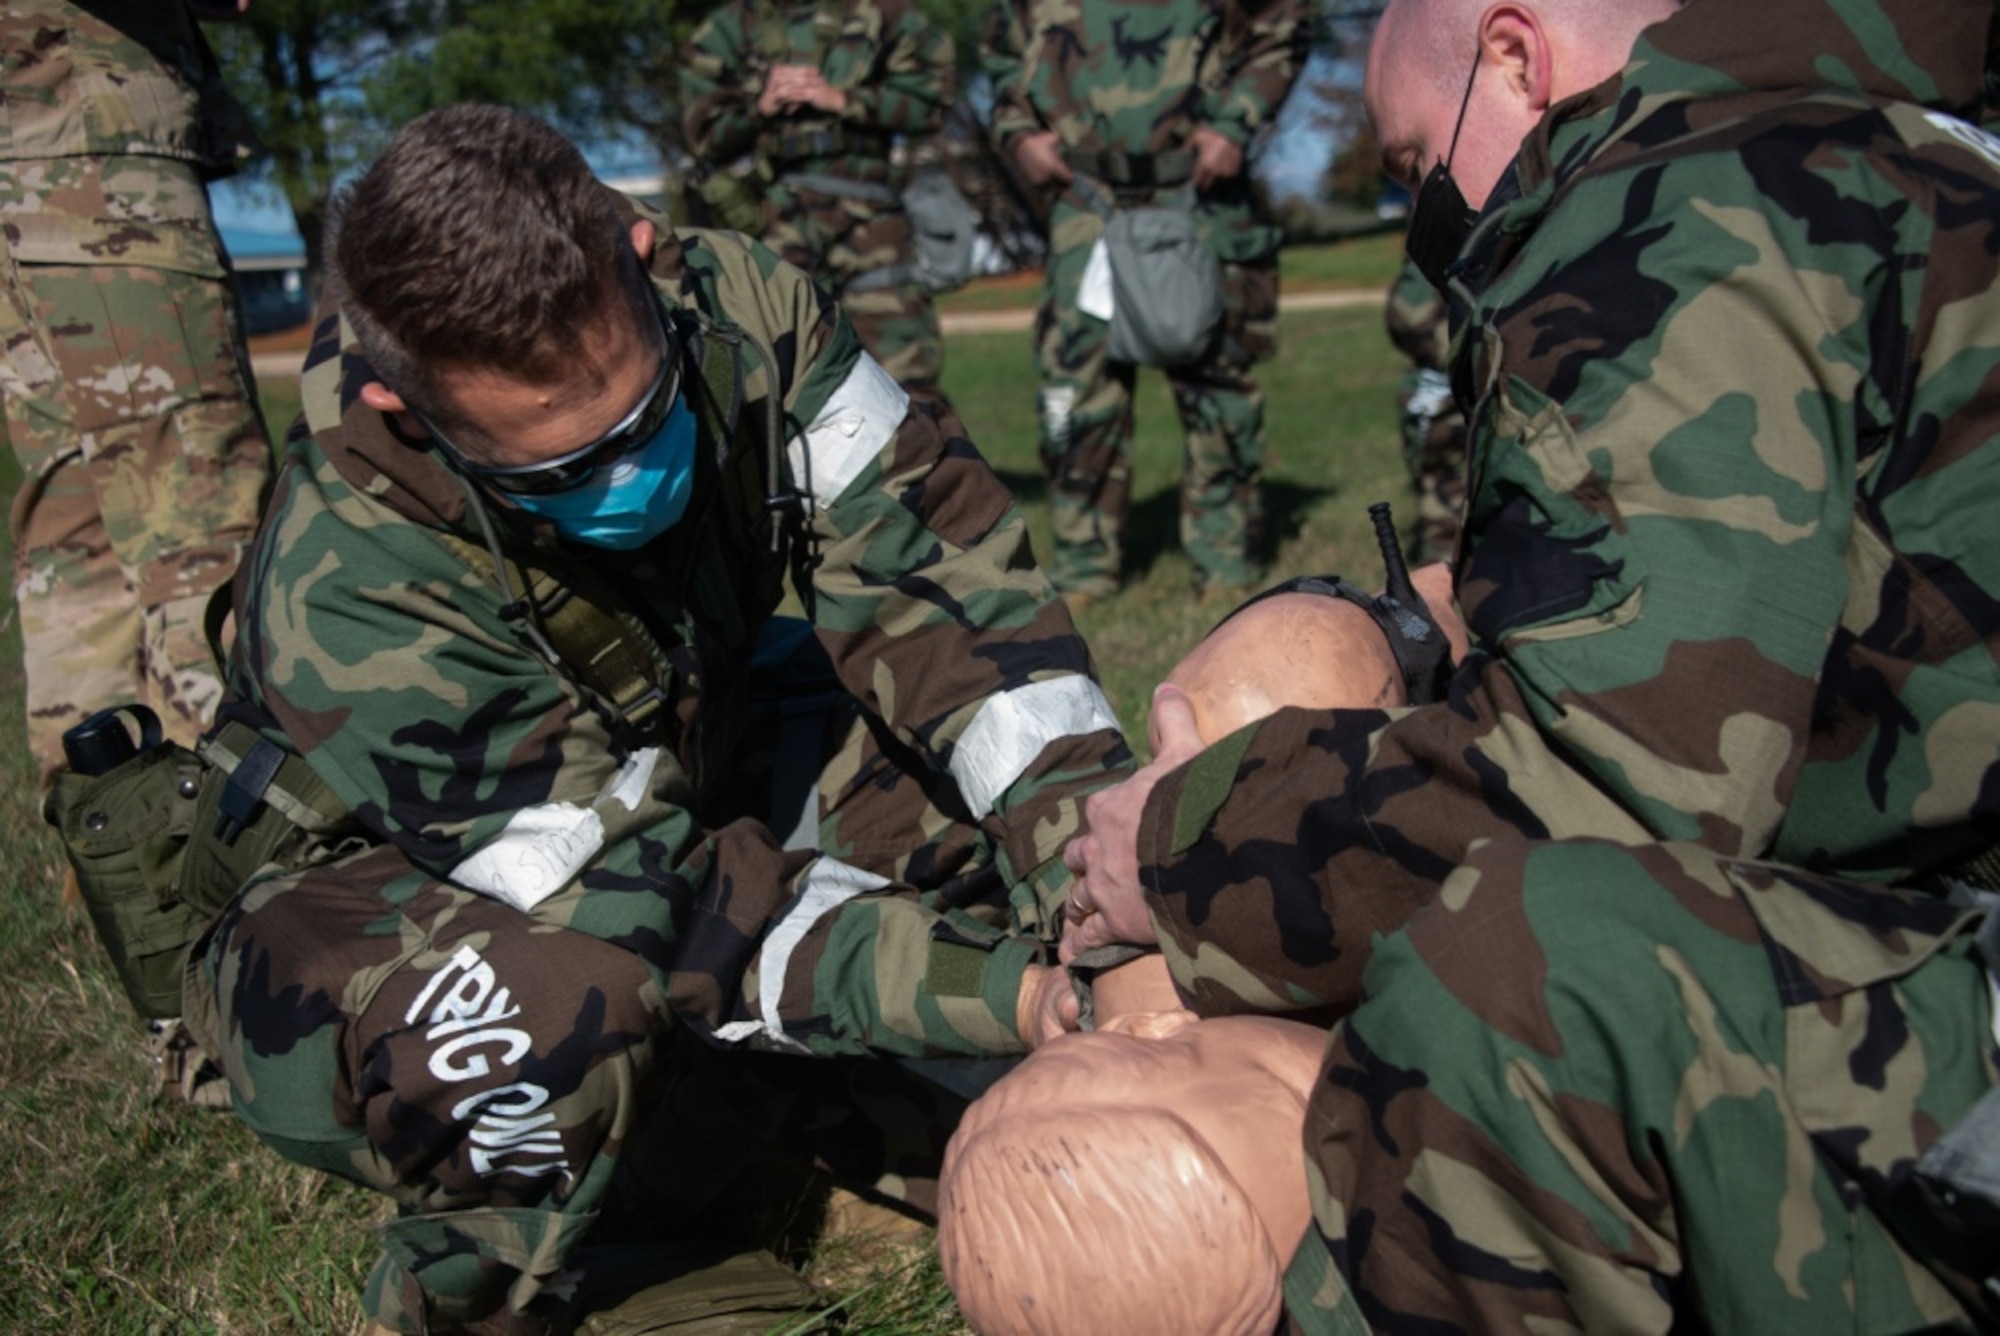 Airmen from the 108th Wing set a mock patient on a litter to be transported as part of a Medical Evacuation and Tactical Combat Casualty Care training on Joint Base McGuire-Dix-Lakehurst, N.J., Nov. 16, 2020. The MEDEVAC TCCC training gives a basic understanding of how service members can apply emergency triage in any applicable situation in a deployed environment. (U.S. Air Force photo by Airman 1st Class Joseph Morales)